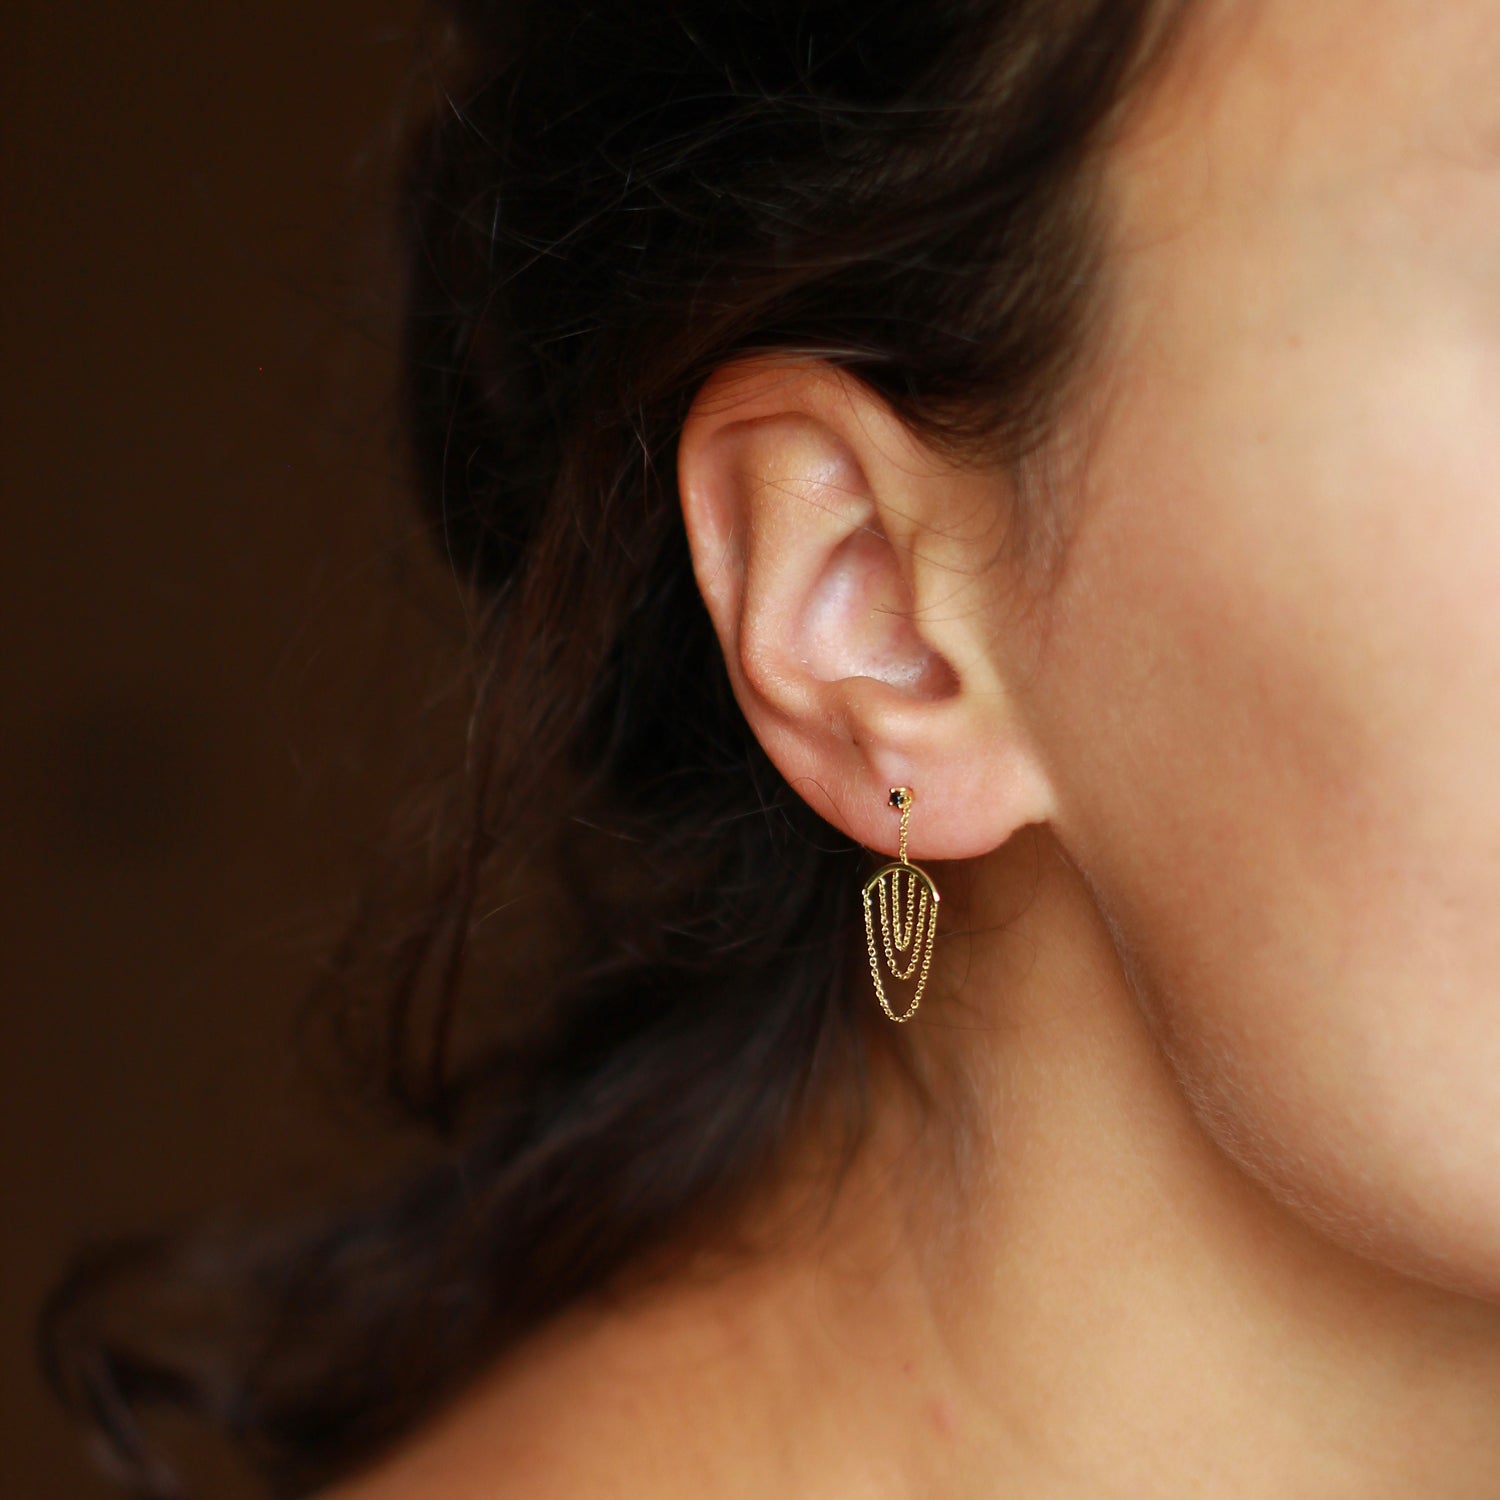 Sweet Pea 18ct yellow gold Nouveau Now black diamond stud earrings with hanging gold arcs with layered chain on model. 